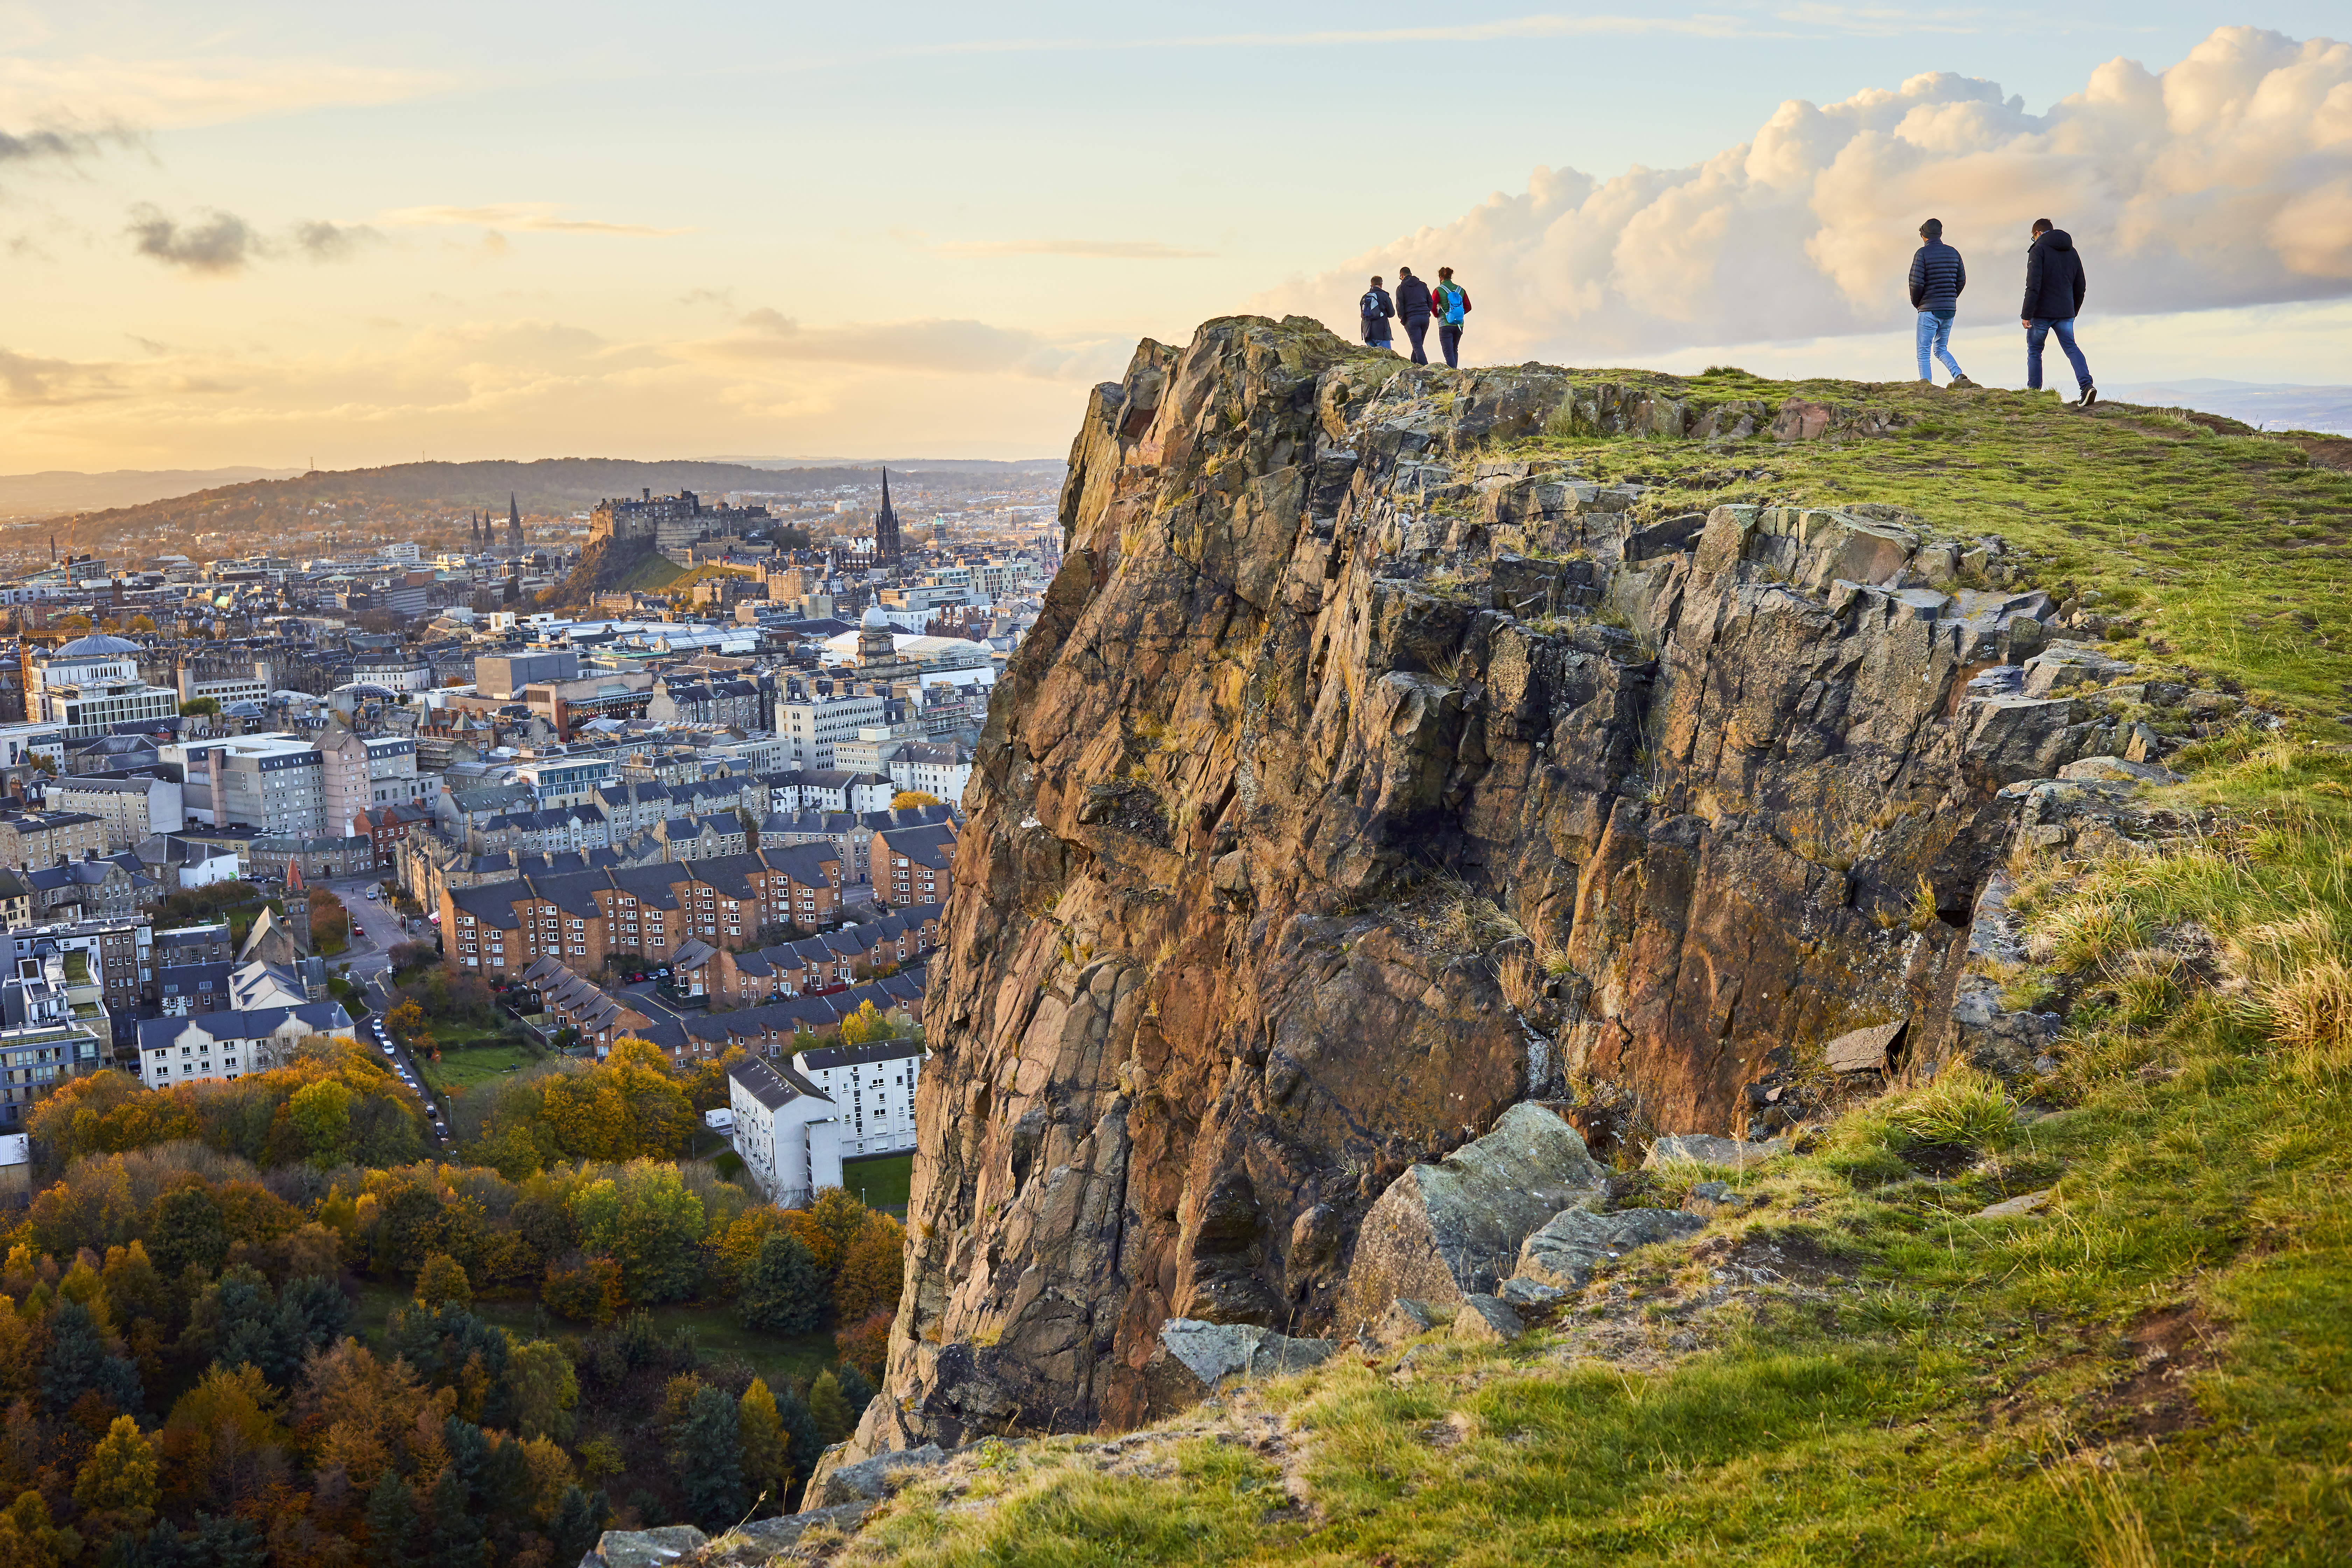 Skyscanner: Scotland has Canadians flocking to Edinburgh in May, a travel hot spot